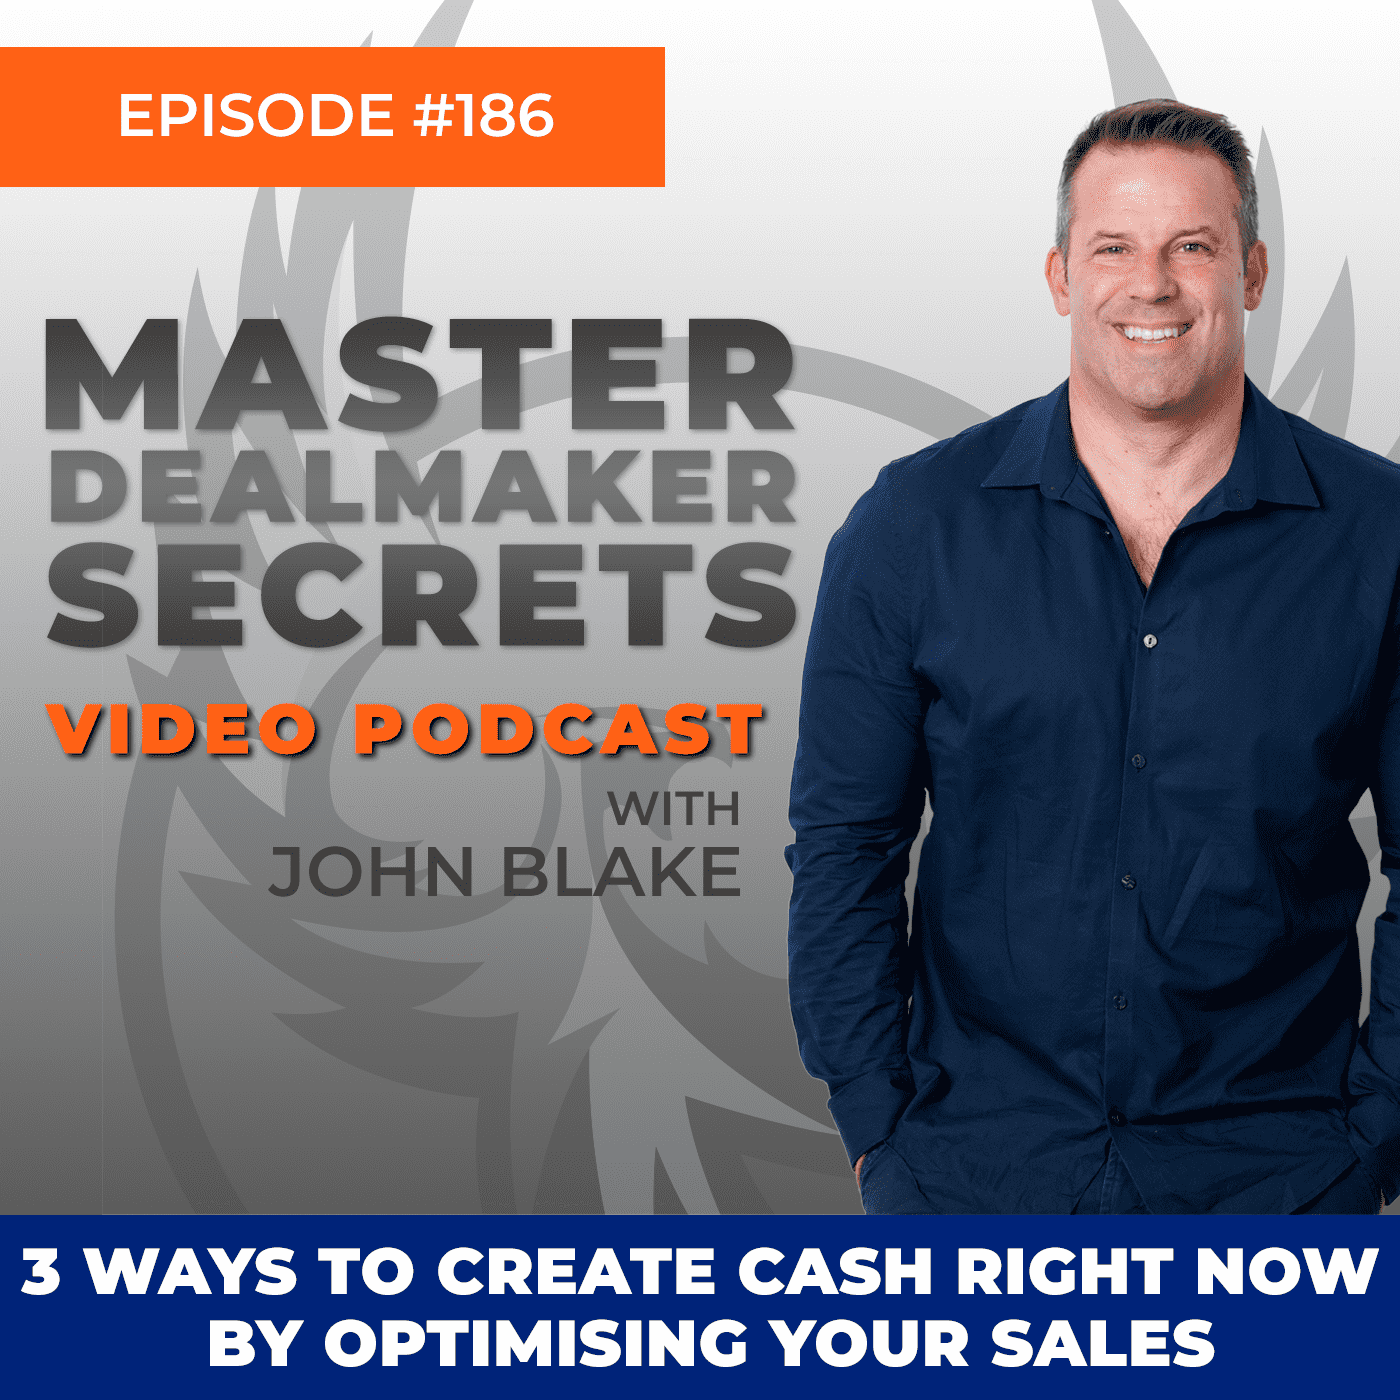 John Blake 3 Ways to Create Cash Right Now By Optimising Your Sales